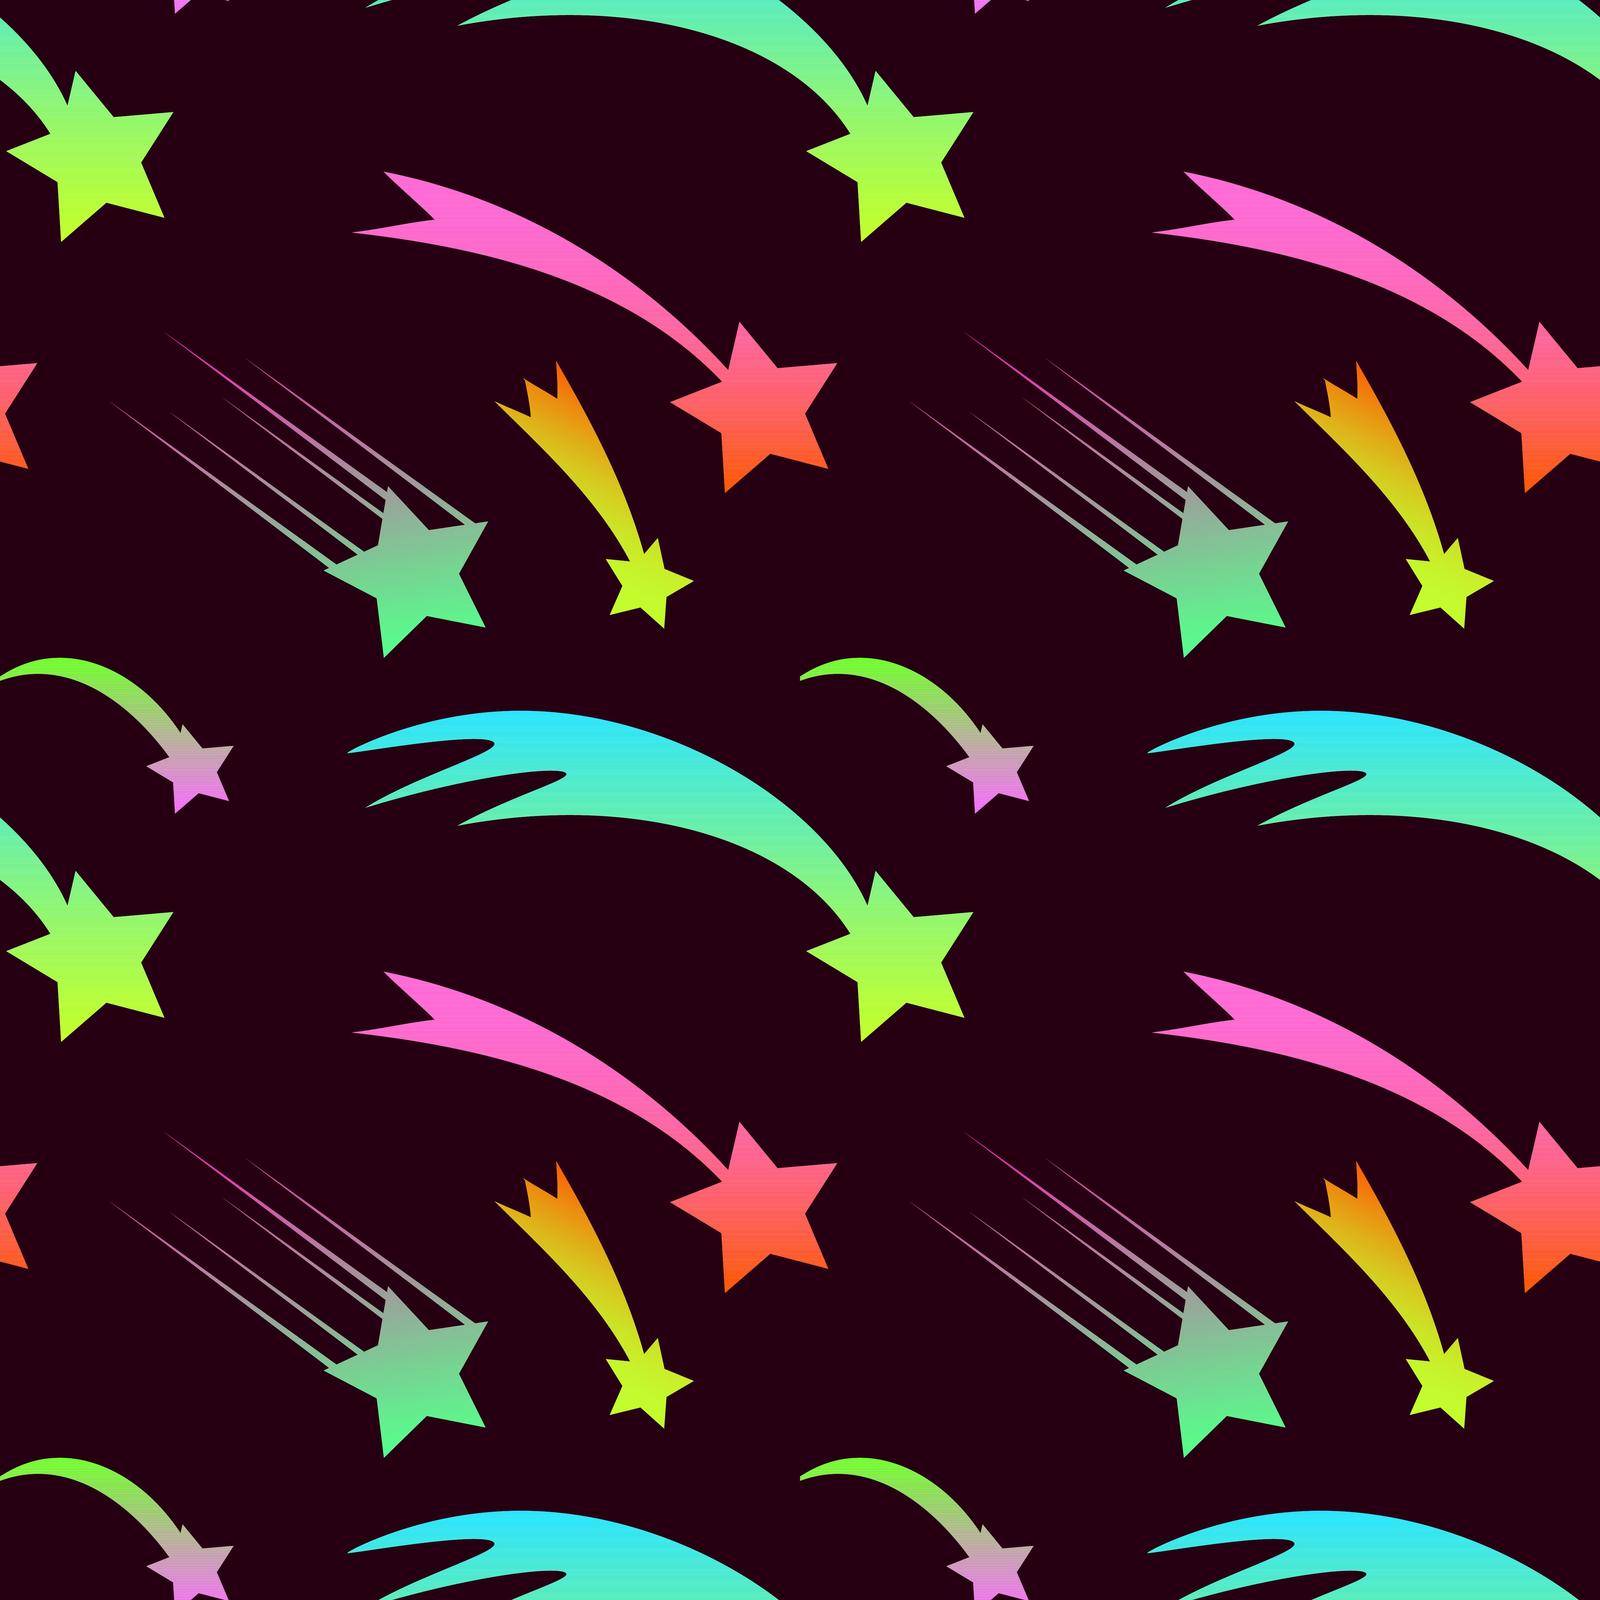 Festive cute seamless pattern with neon flying stars. Celebratory background with Christmas star. Ornament for gift wrapping paper, textile, surface textures. Vector Illustration.